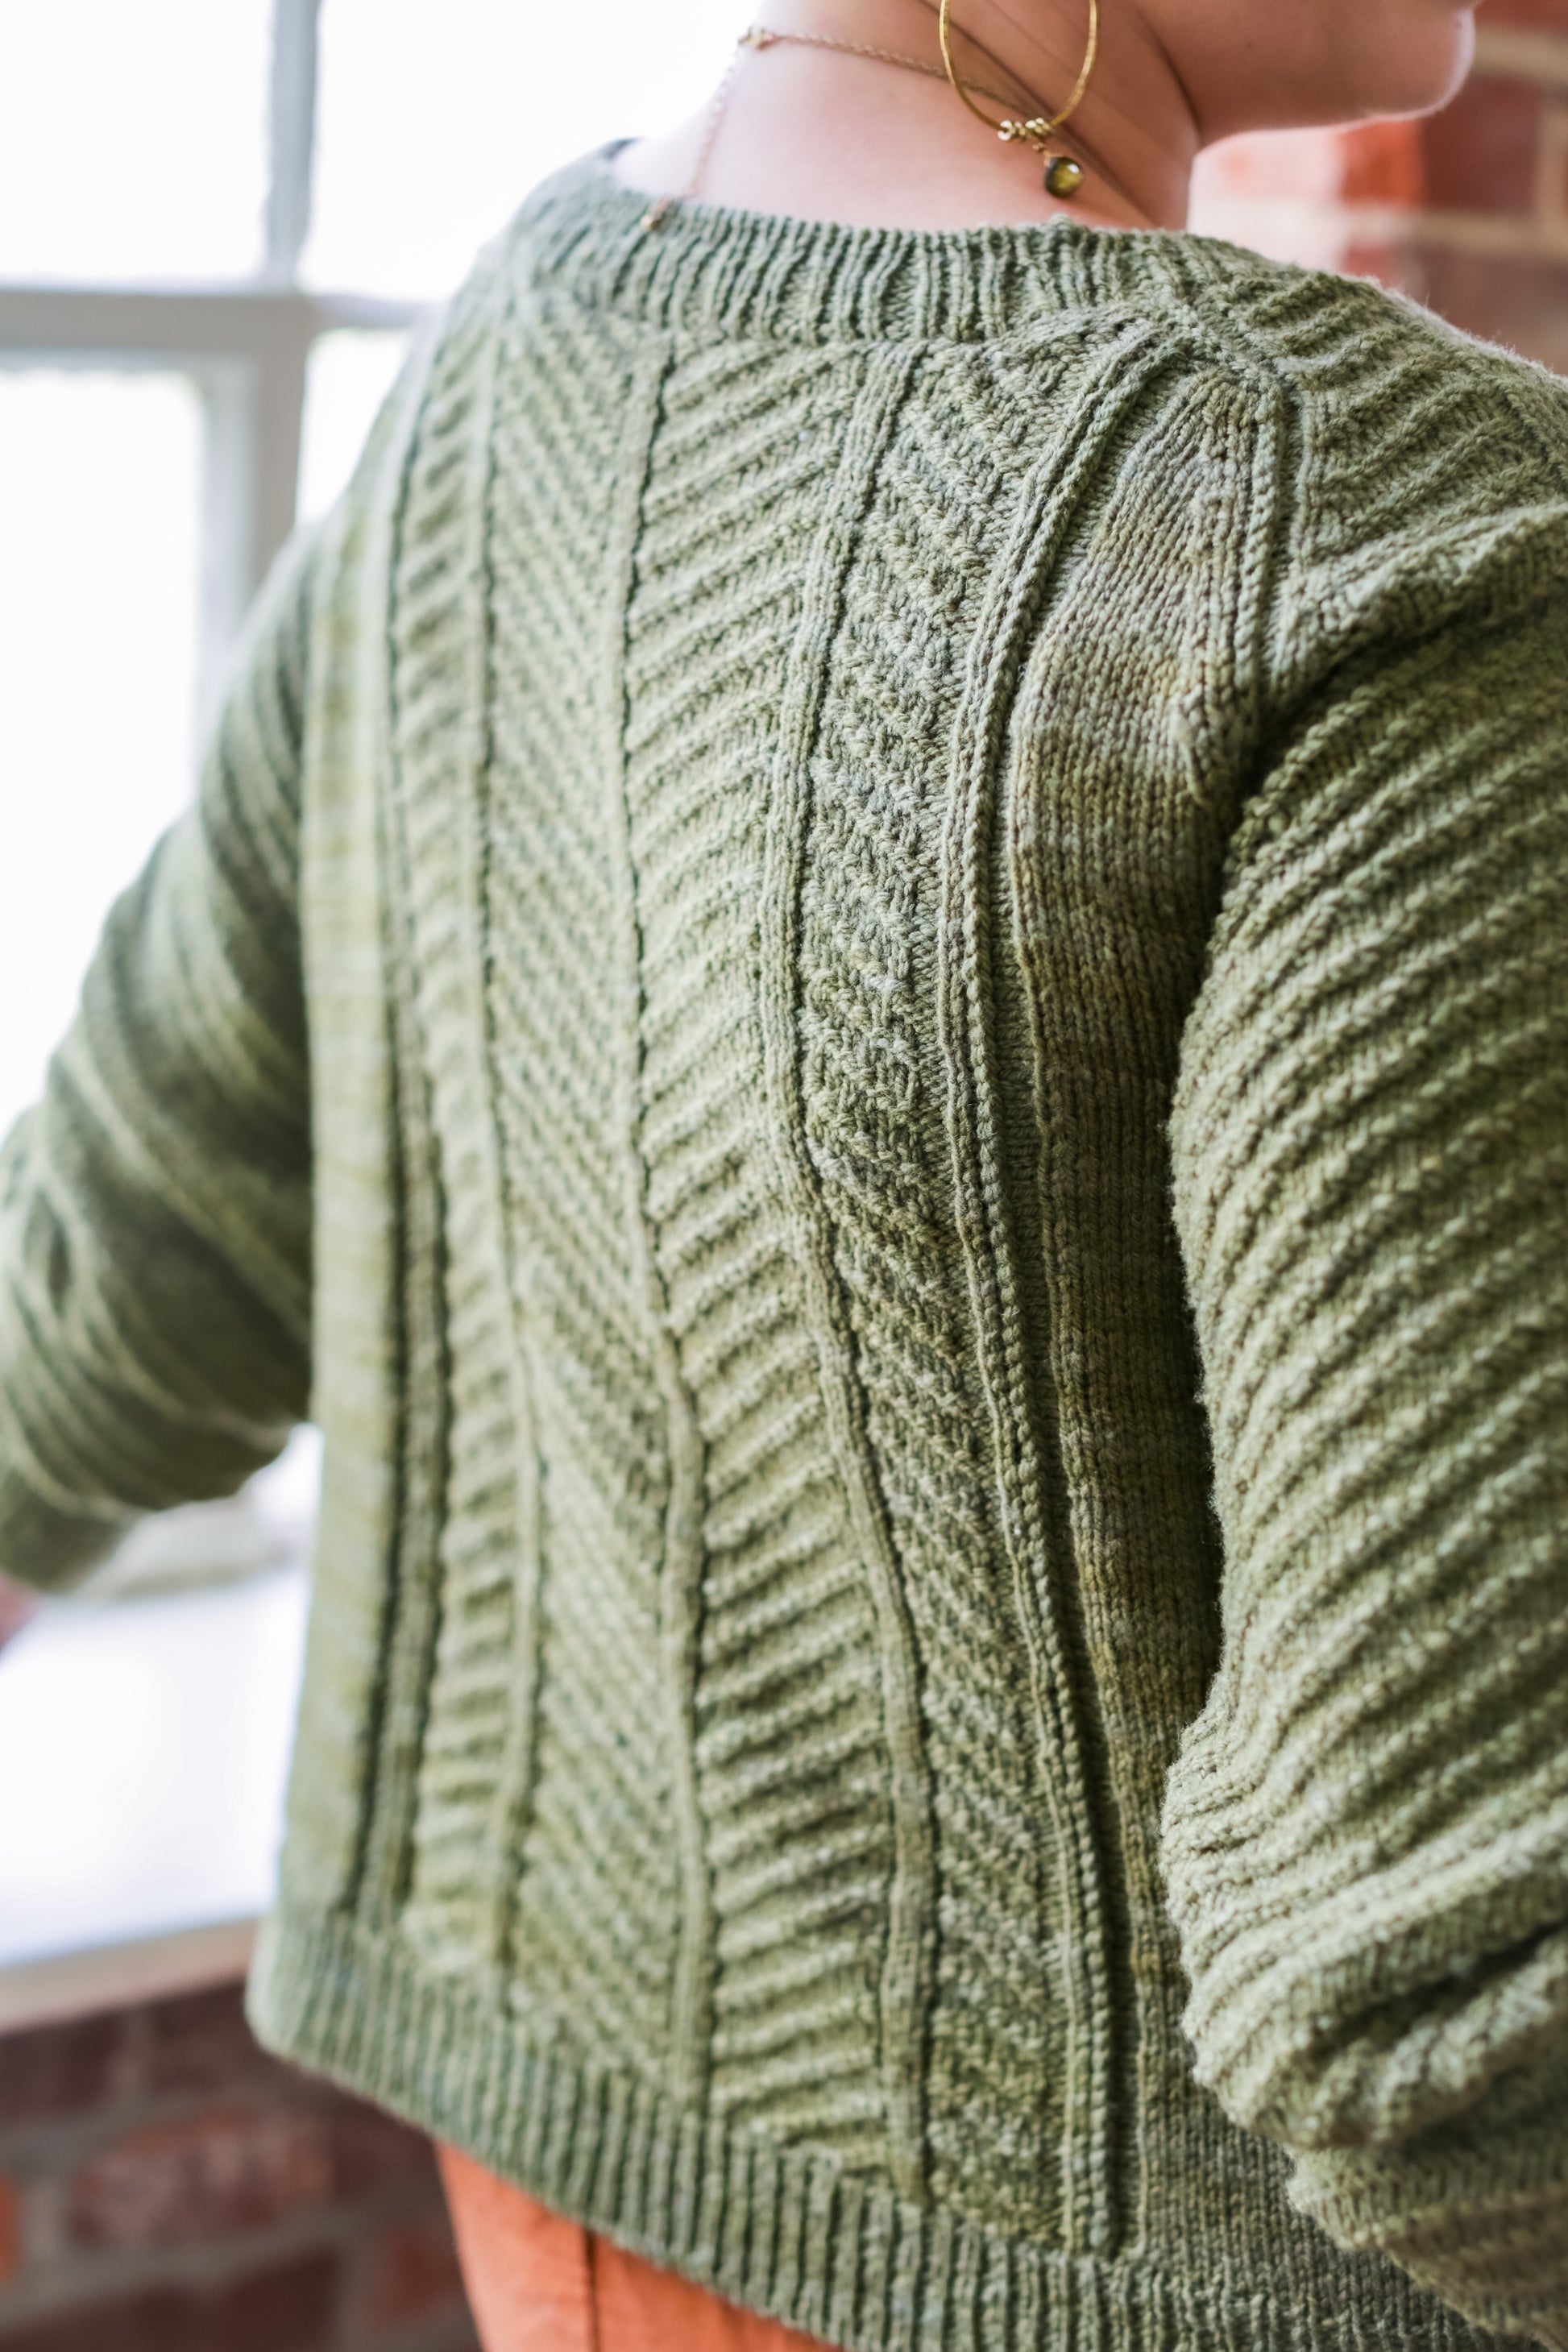 Seen from behind, Jen wears a green cardigan with orange pants. The cardigan has a thin ribbed edge and a central chevron pattern down the back, as well as chevron stitch down the arms. A window can be seen in the background.